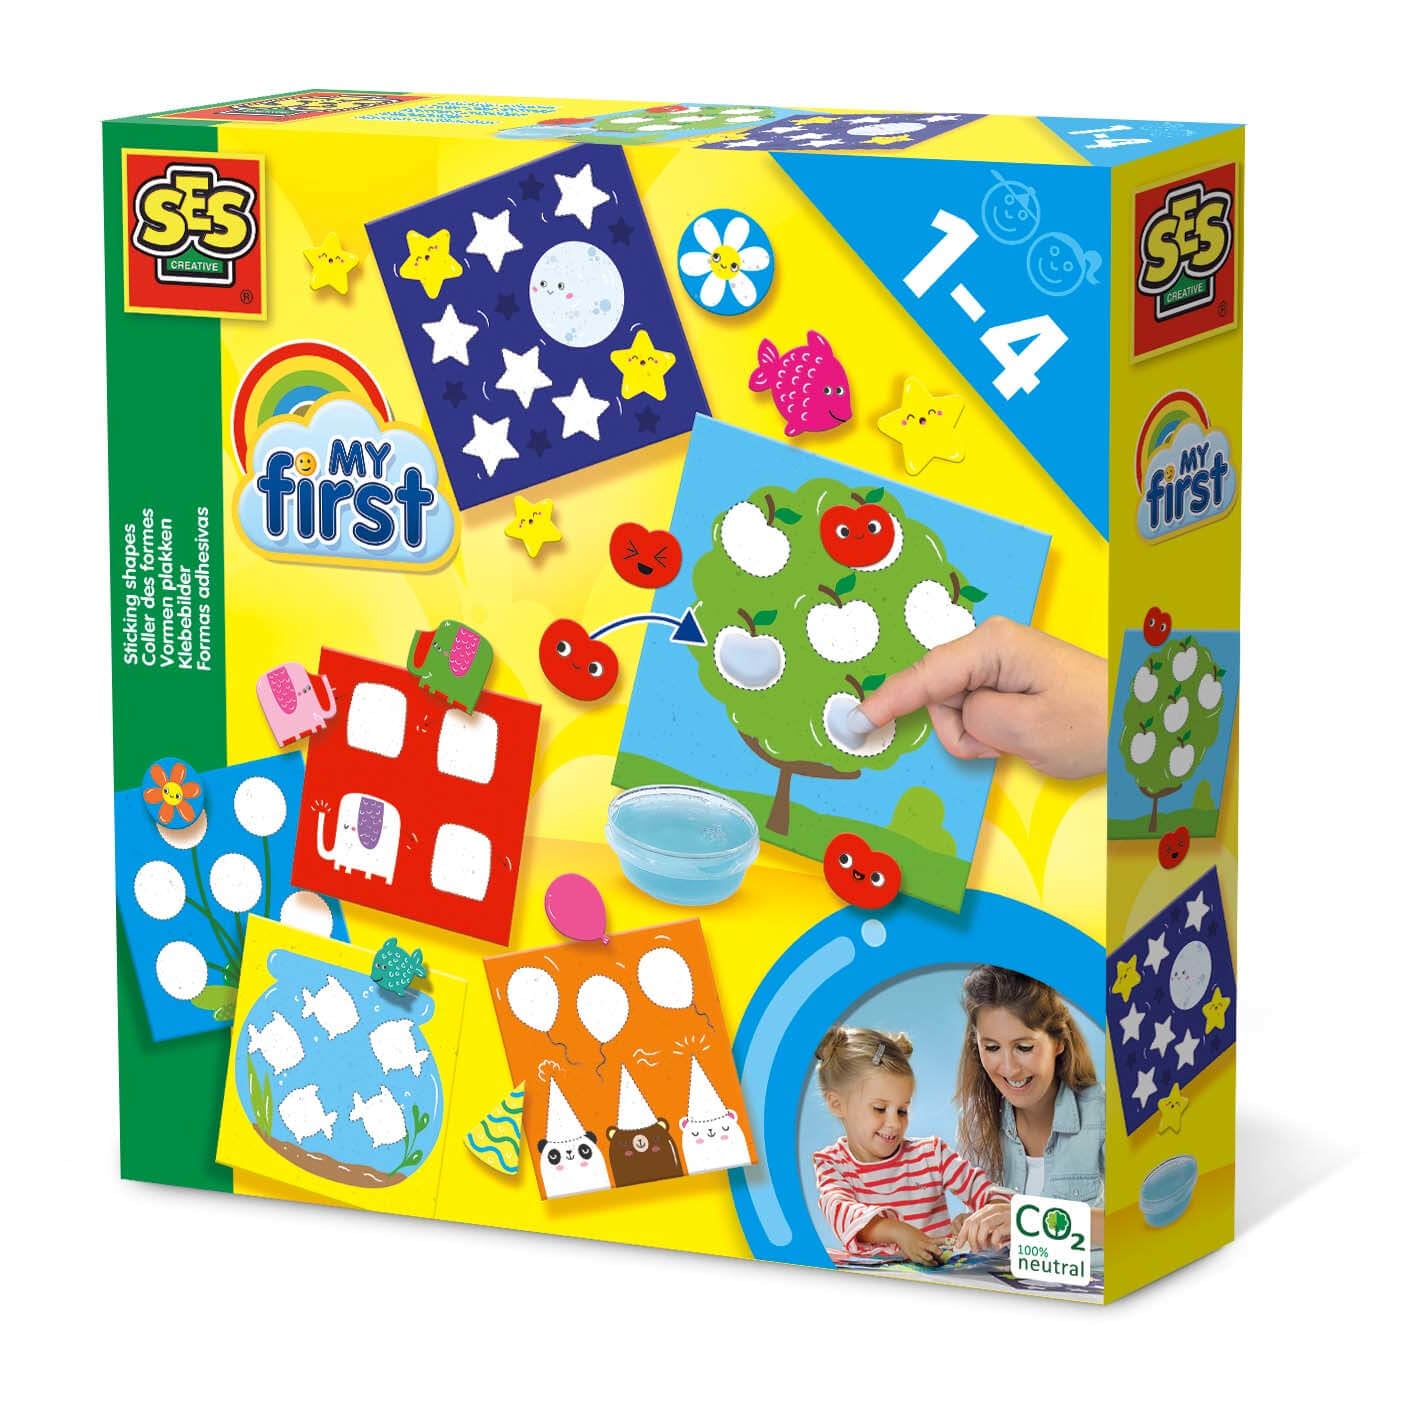 SES Creative - Toys, Crafts & Games - Cogs Toys and Games Ireland